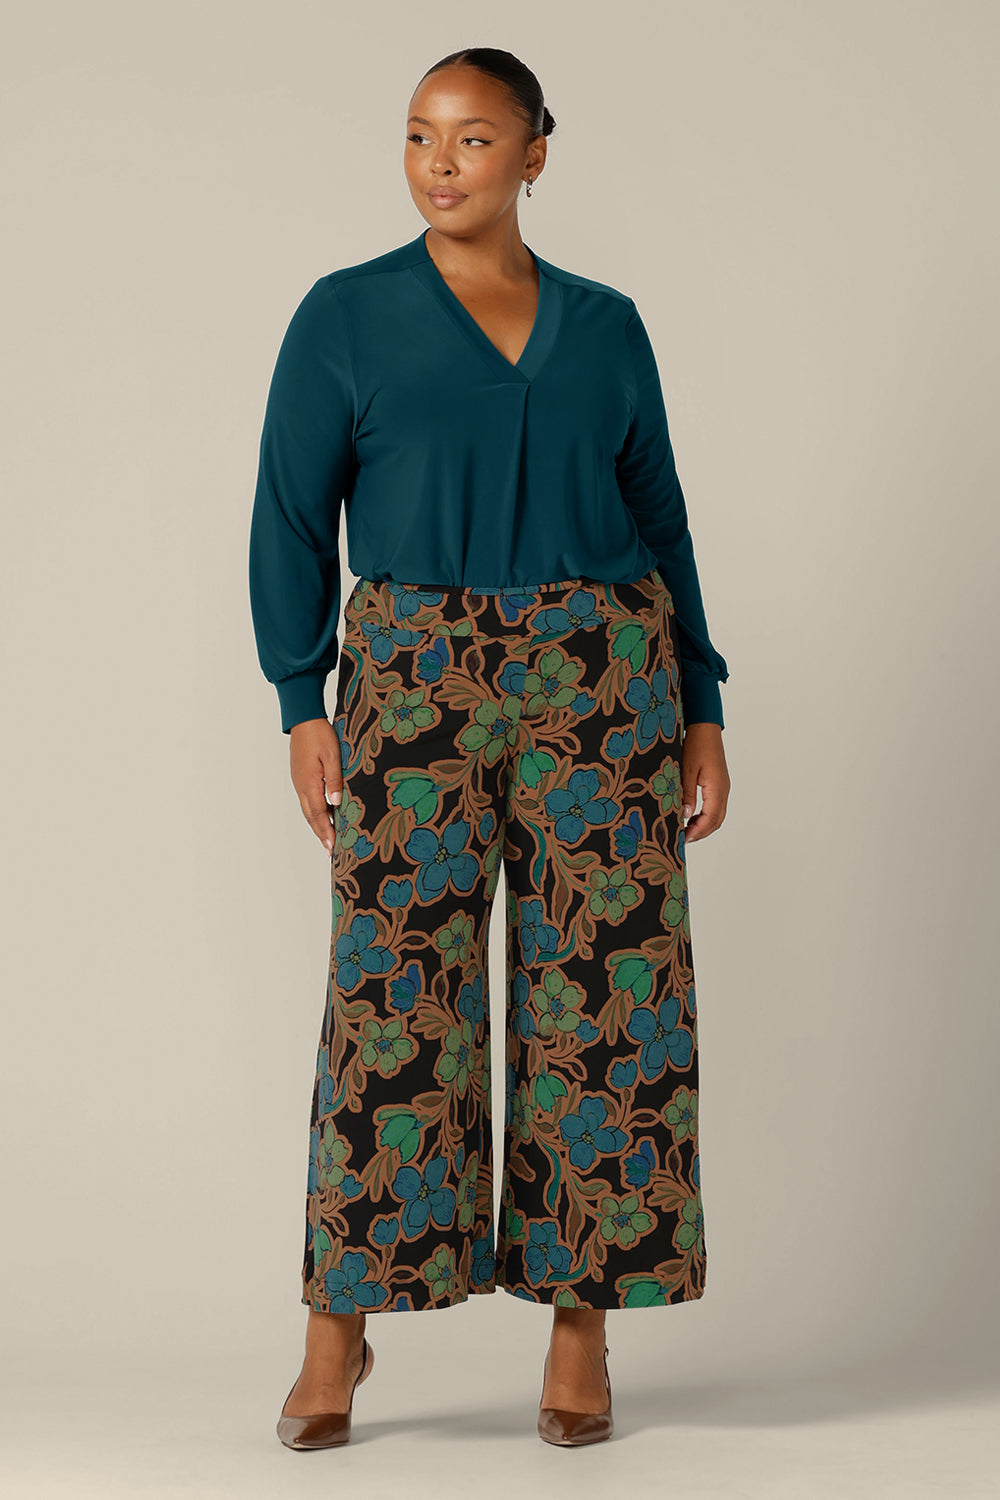 Long sleeve, V-neck top in dark teal jersey, size 18 worn with wide leg, printed pants. Both are made in Australia by Australian and New Zealand women's clothing company, L&F. 